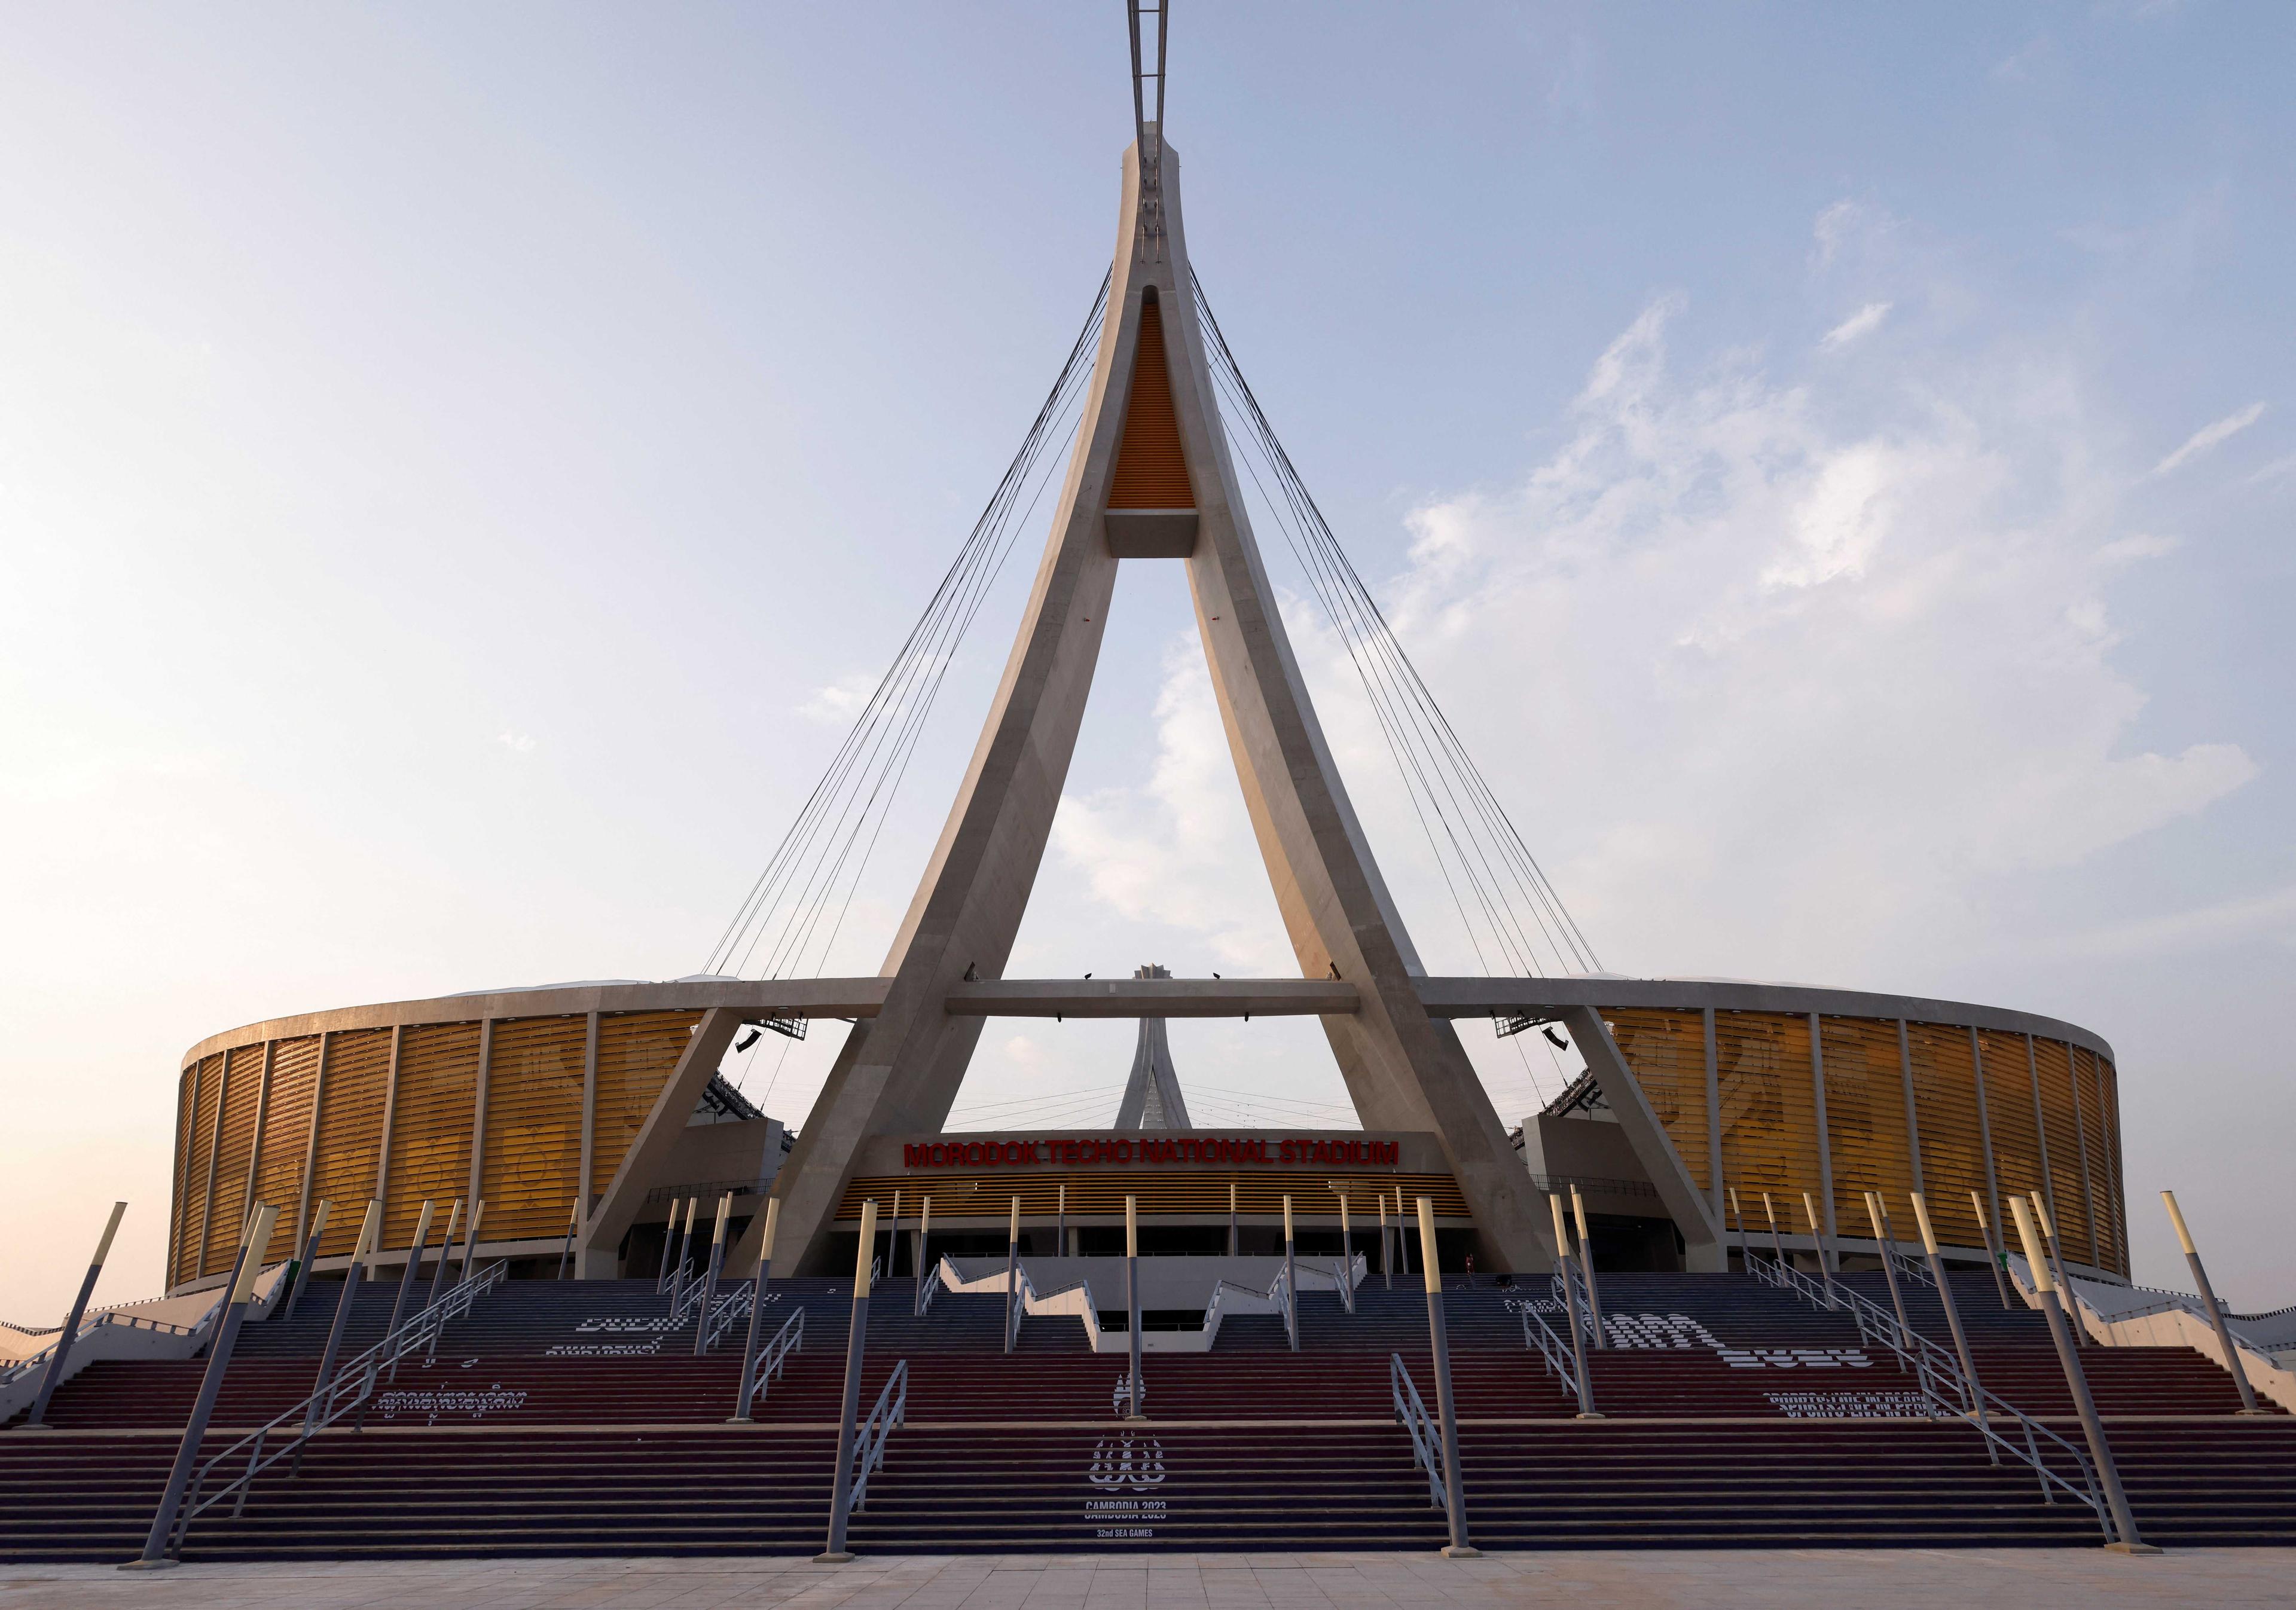 Morodok Techo National Stadium which is the main stadium of the 32nd Southeast Asian (SEA) Games - the first time the regional multi-sport tournament will be hosted in Cambodia, is pictured in Phnom Penh, Cambodia, May 2. Photo: Reuters